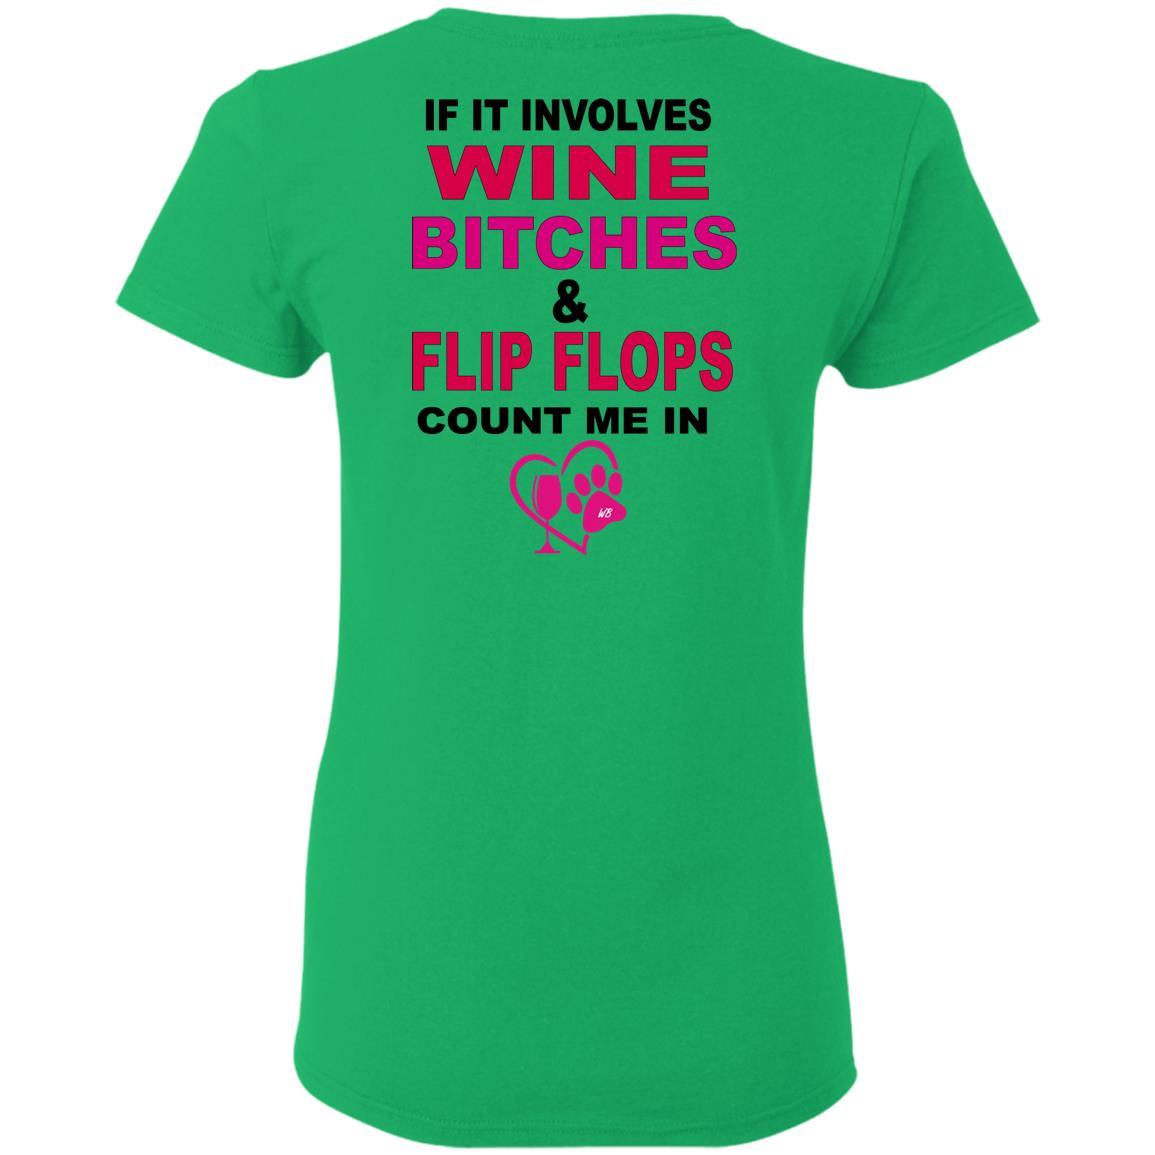 T-Shirts WineyBitches.co Hilariously Funny "Count Me In" Ladies T-Shirt for Wine & Dog Lovers WineyBitchesCo